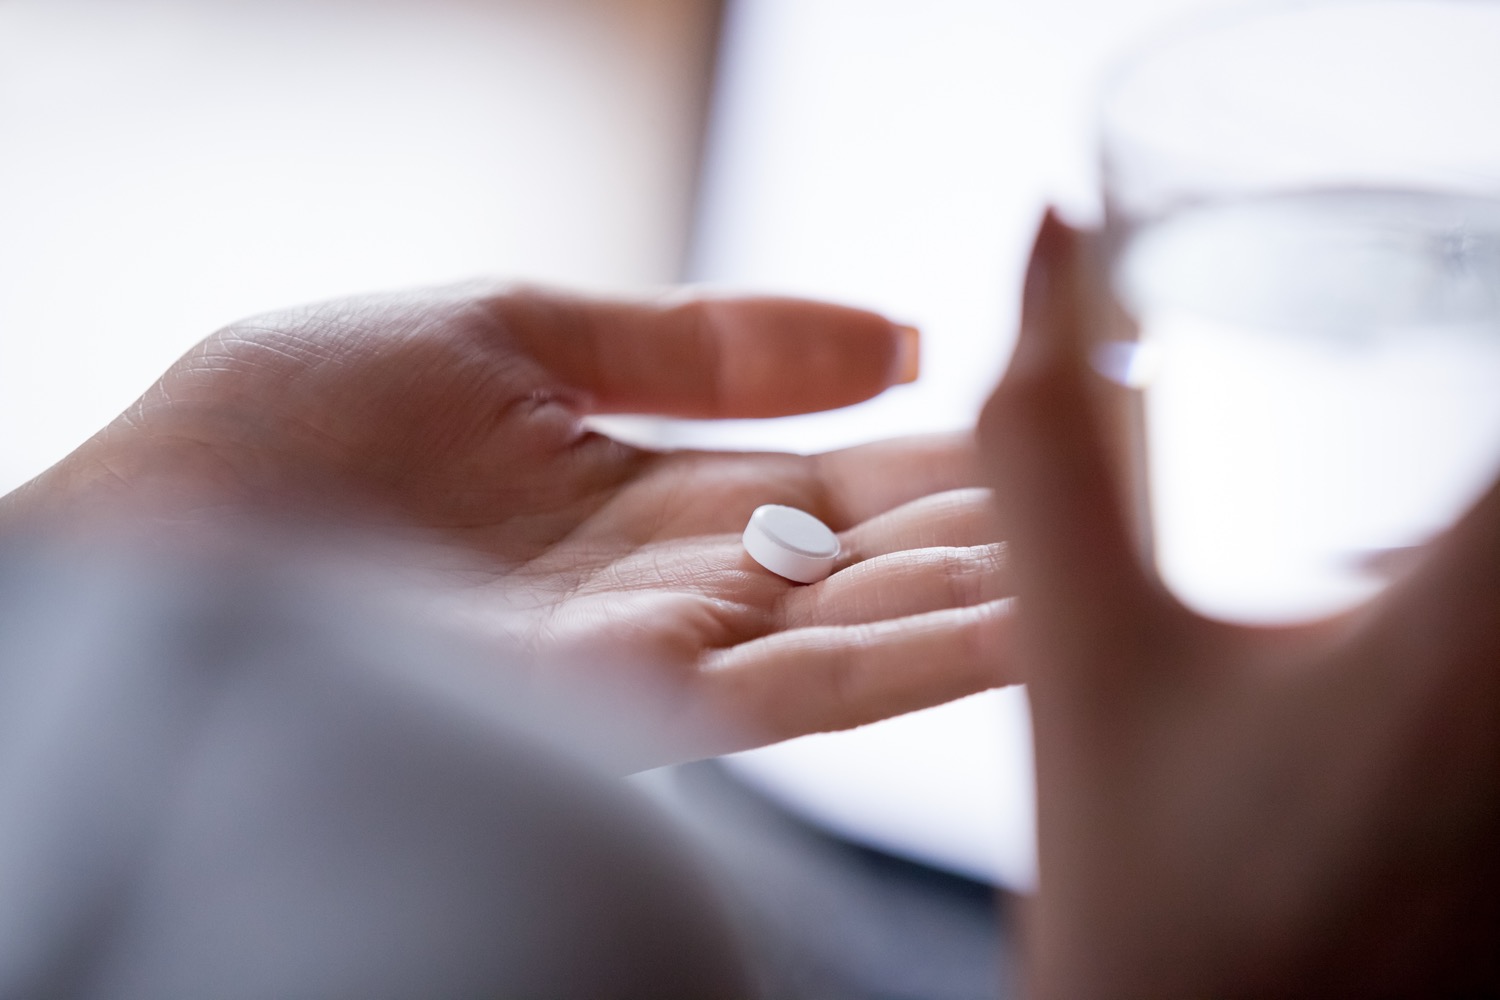 a close up of a white hand holding a small circular pill and a glass of water in the other hand